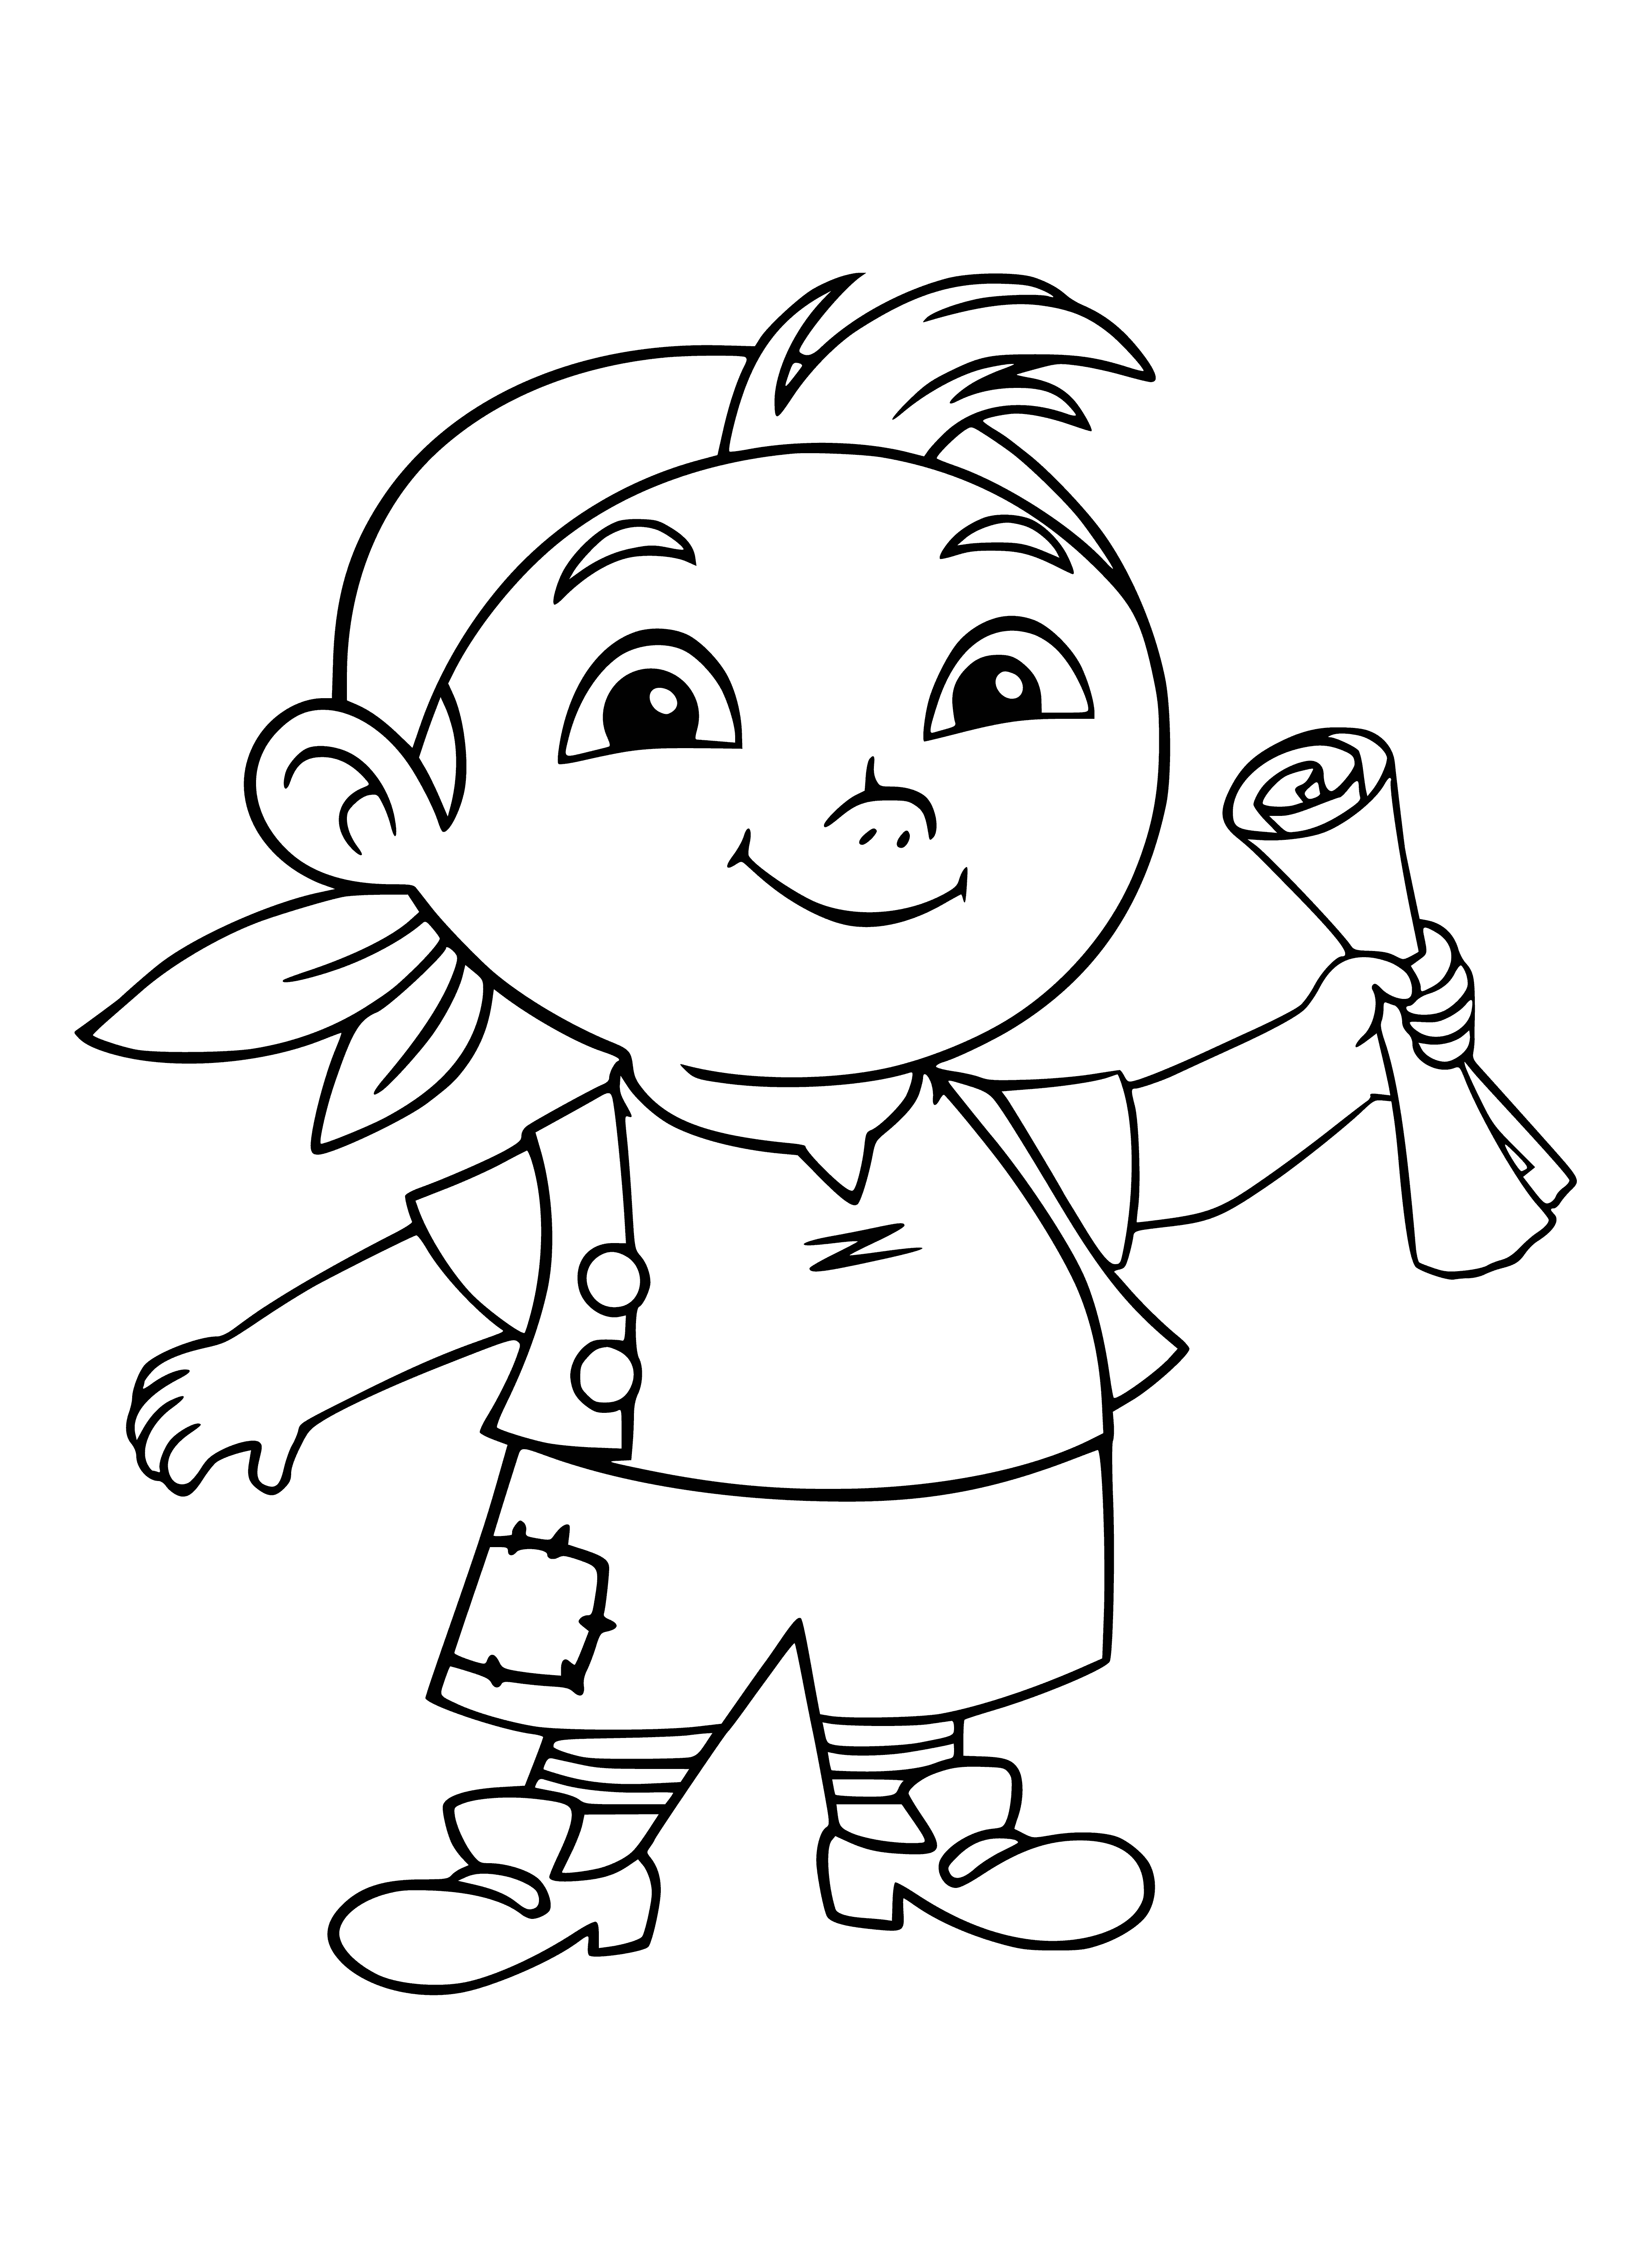 Cabby and map coloring page